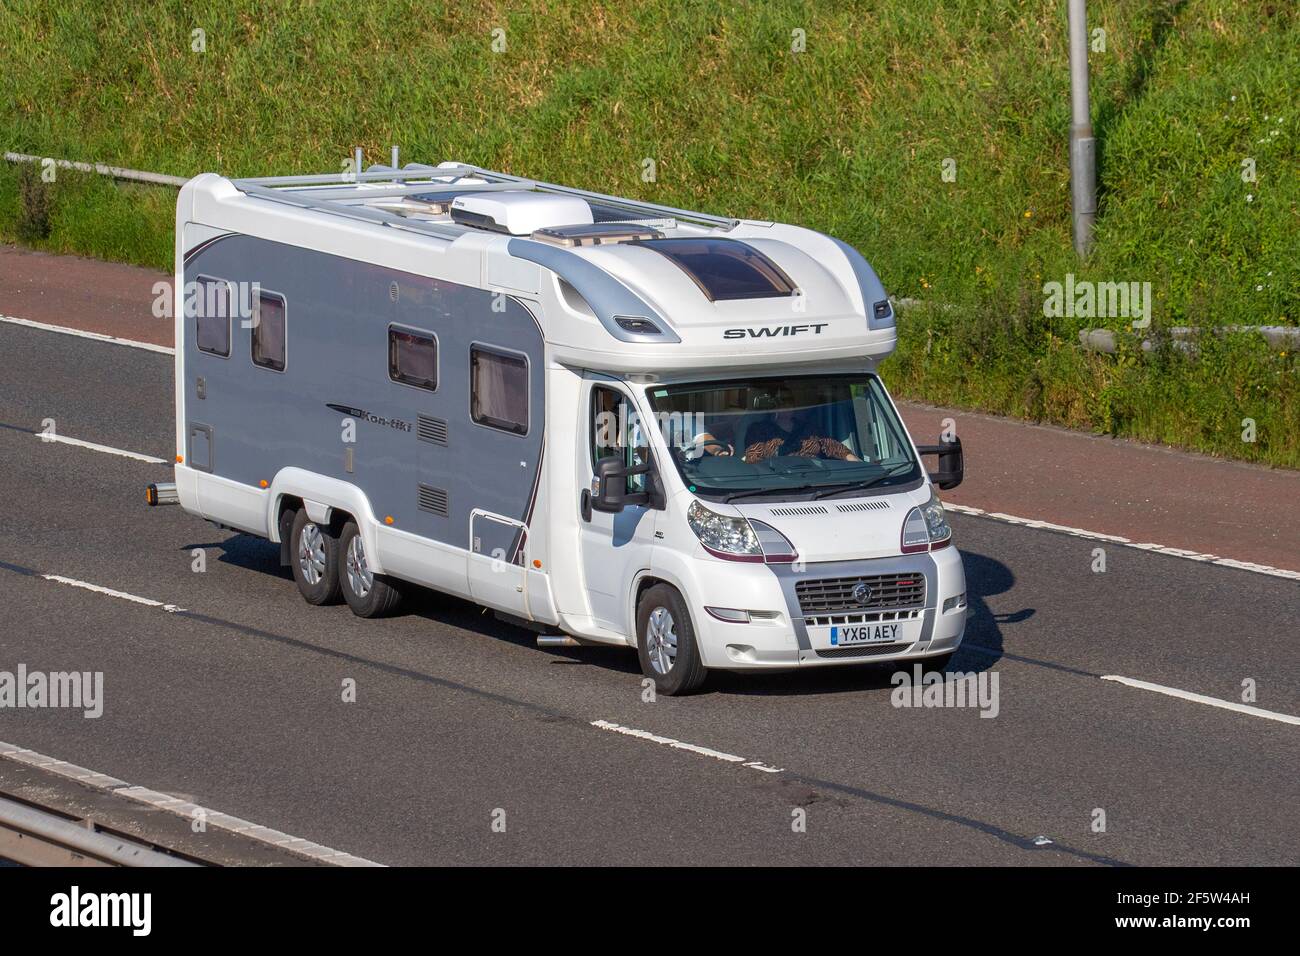 2011 Fiat Ducato 40 Max 160 M-Jet Motorhome 2999cc diesel; Motorhomes,  campervans on Britain's roads, RV leisure vehicle, family holidays,  caravanette vacations, Touring caravan holiday, UK Stock Photo - Alamy